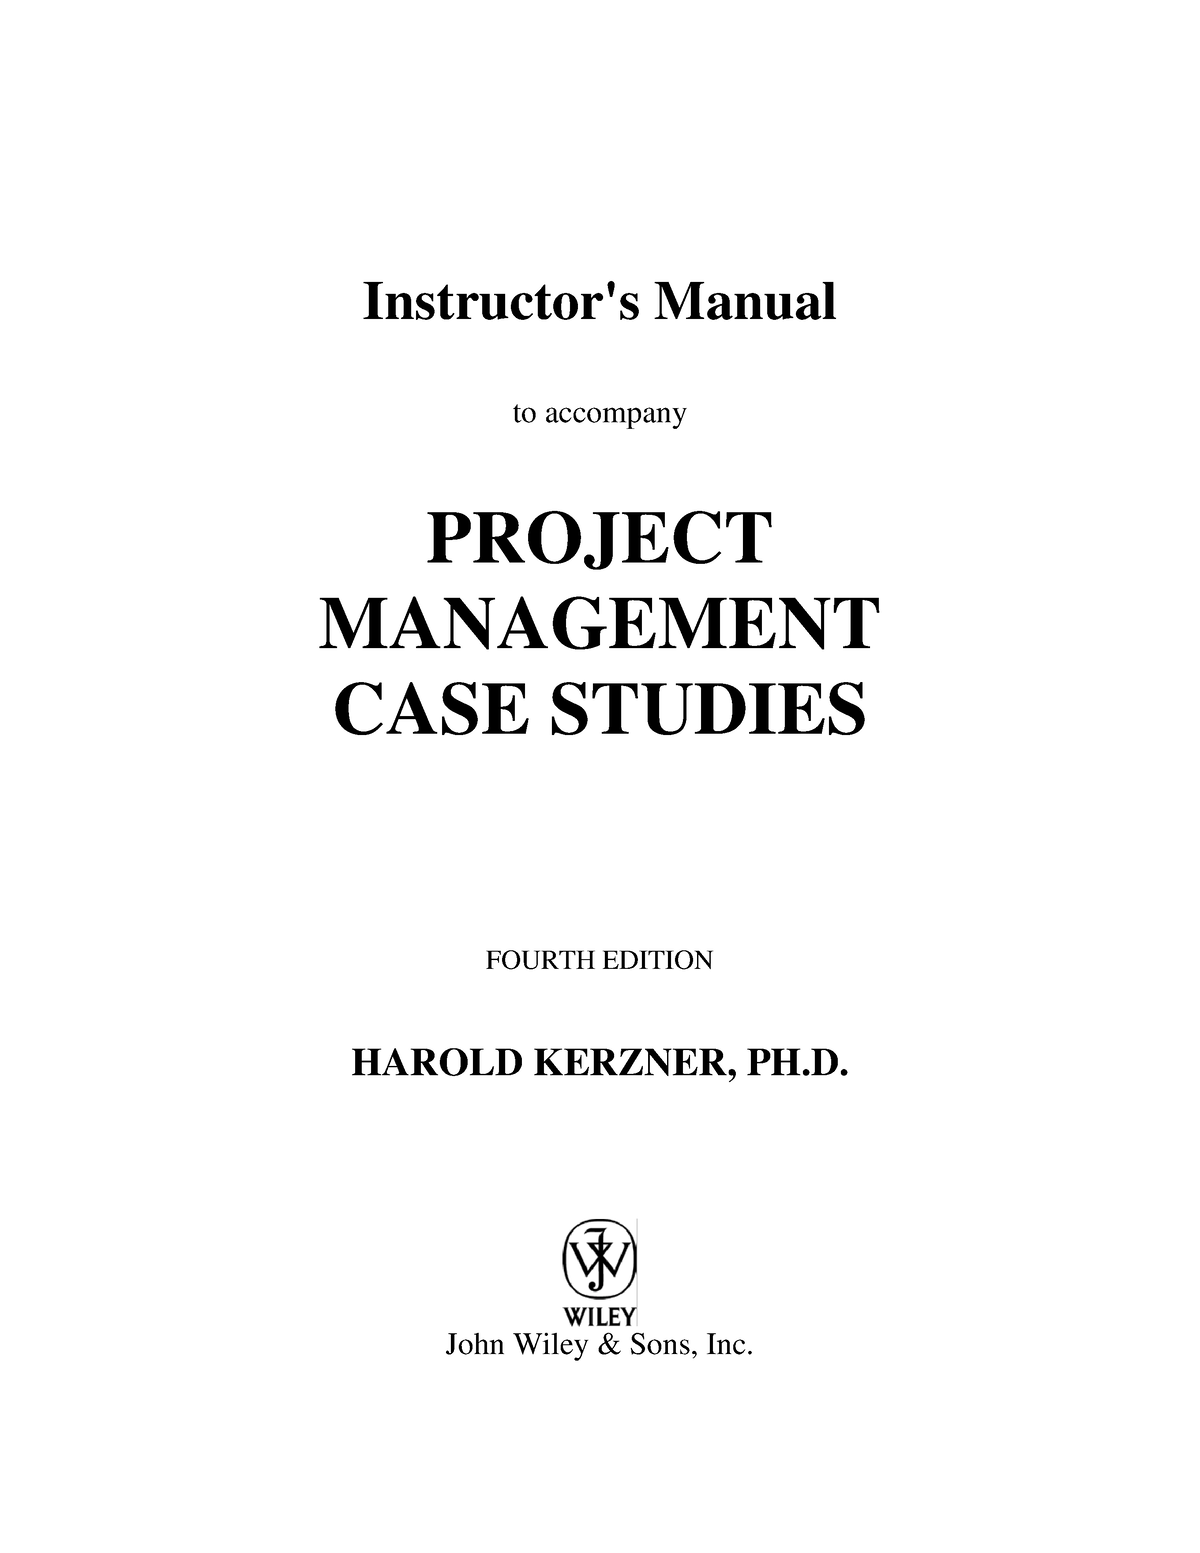 project management case study questions and answers pdf